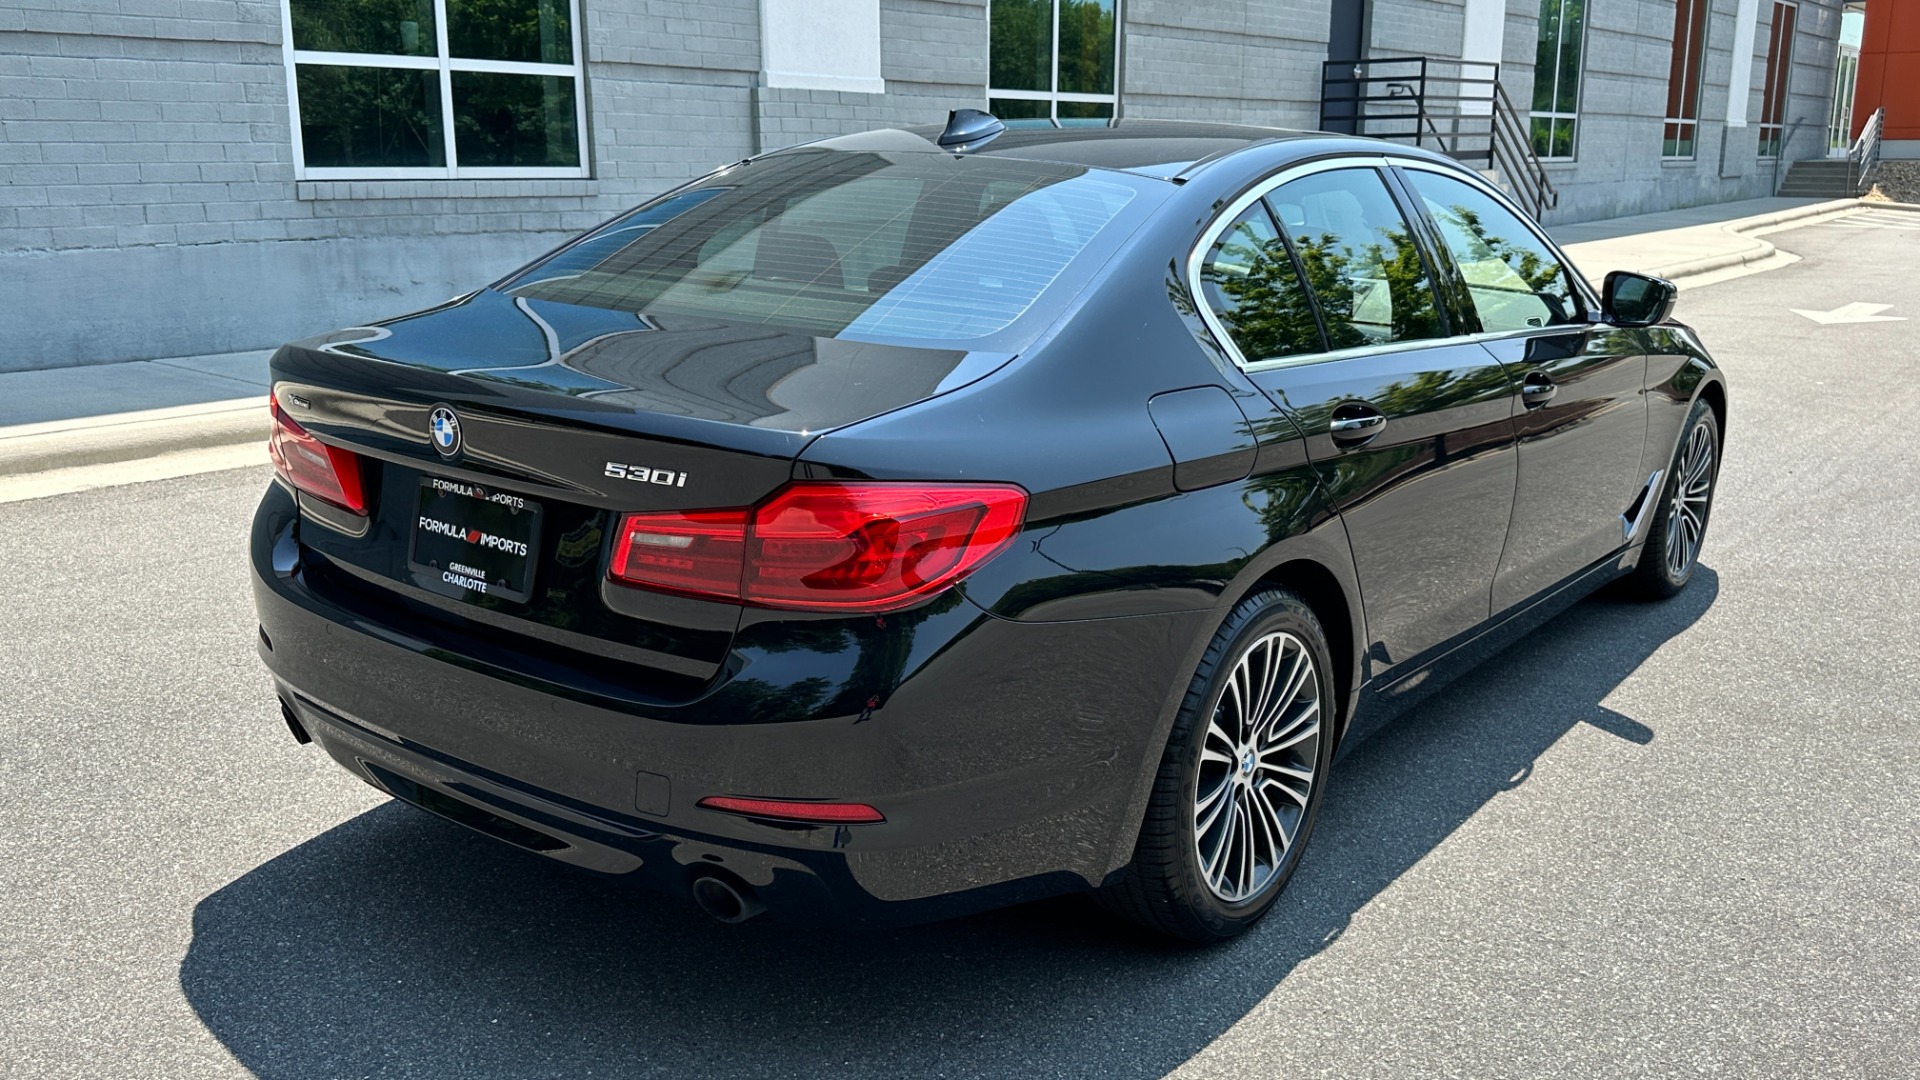 Used 2019 BMW 5 Series 530i xDrive / HEATED SEATS / NAV / SUNROOF / REARVIEW CAMERA for sale $30,795 at Formula Imports in Charlotte NC 28227 4